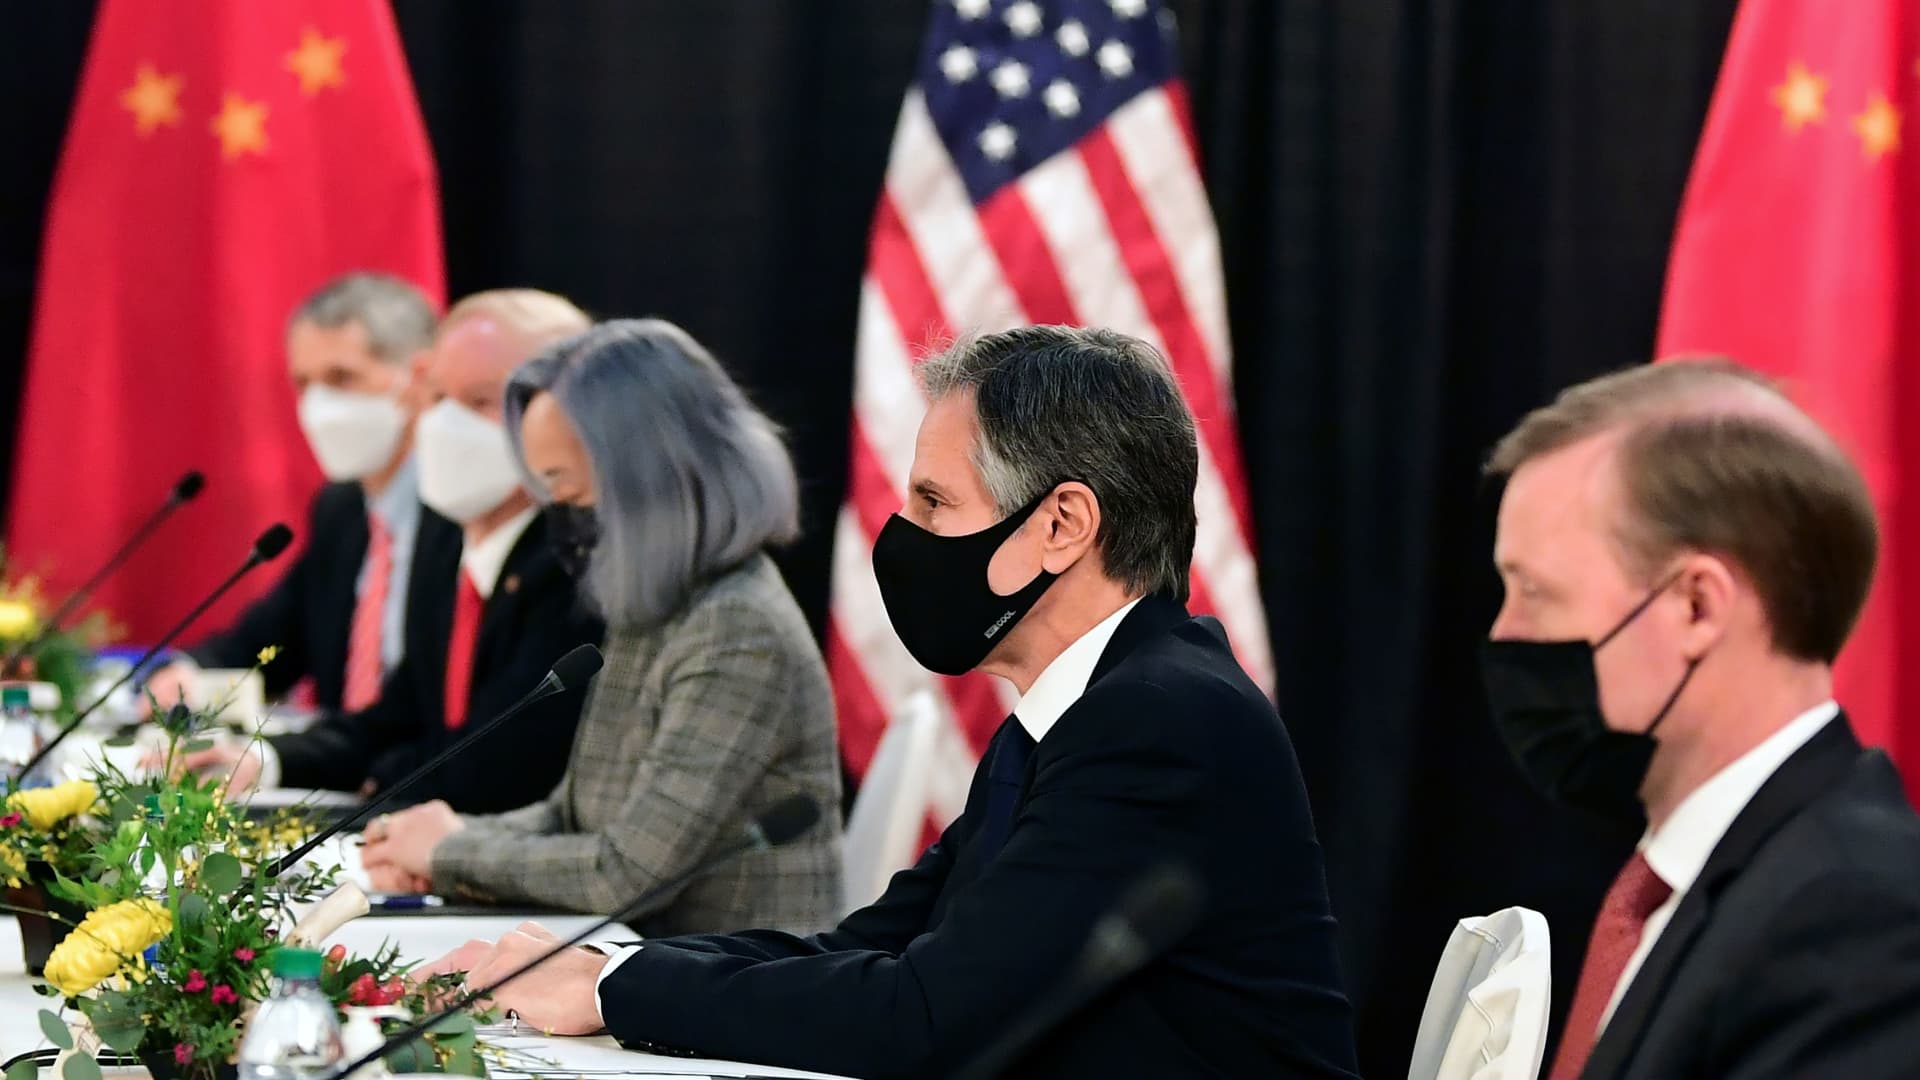 The U.S. delegation led by Secretary of State Antony Blinken (C) and flanked by National Security Advisor Jake Sullivan (R), face their Chinese counterparts at the opening session of U.S.-China talks at the Captain Cook Hotel in Anchorage, Alaska on March 18, 2021.